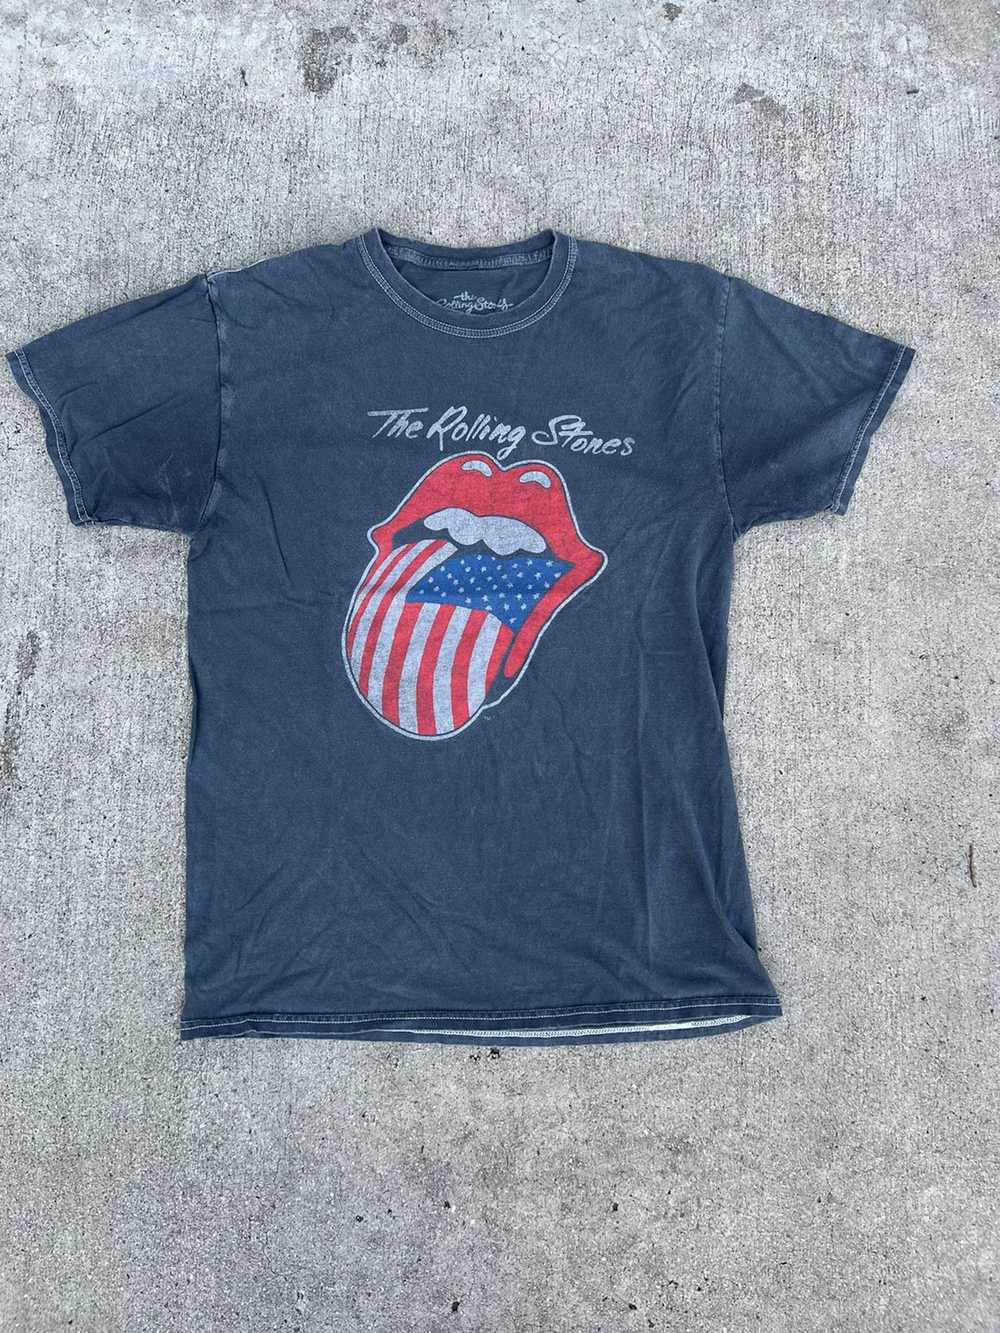 Band Tees × The Rolling Stones × Vintage Grey Rol… - image 1